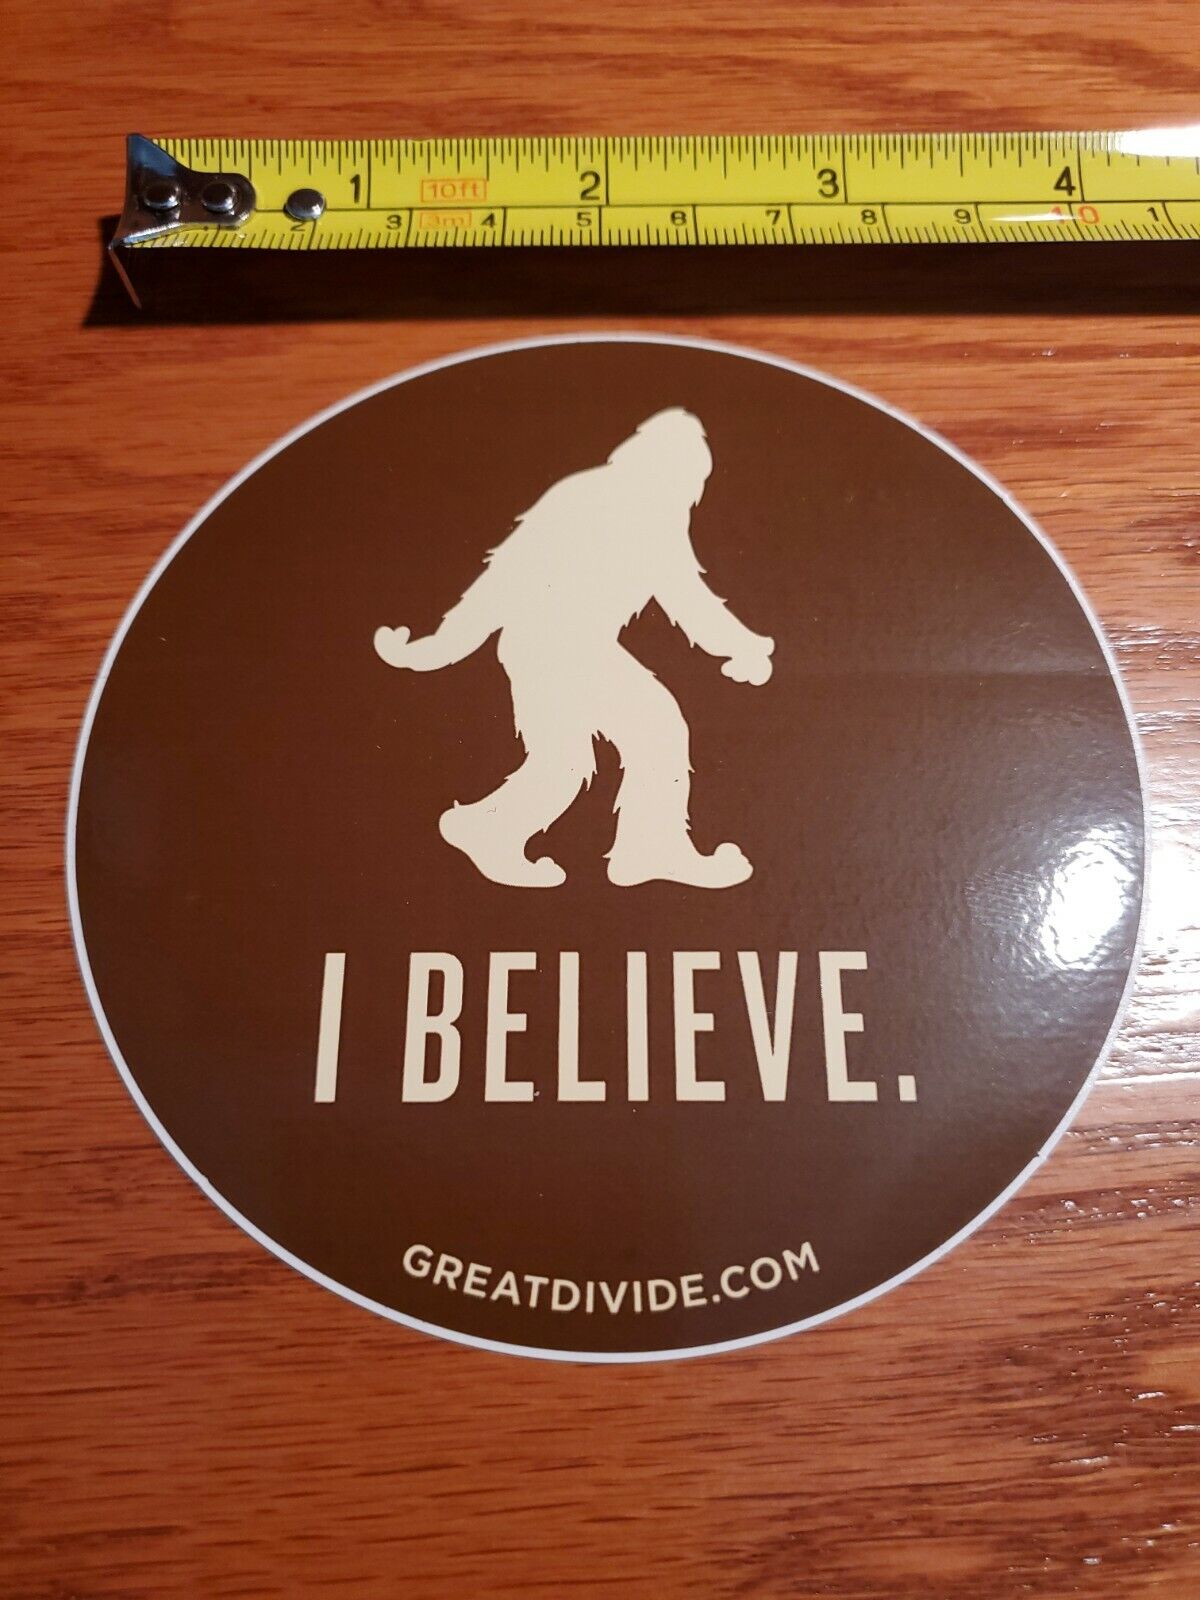 GREAT DIVIDE Brewing Co. Sticker ~NEW Craft Beer Brew Brewery Logo Decal~